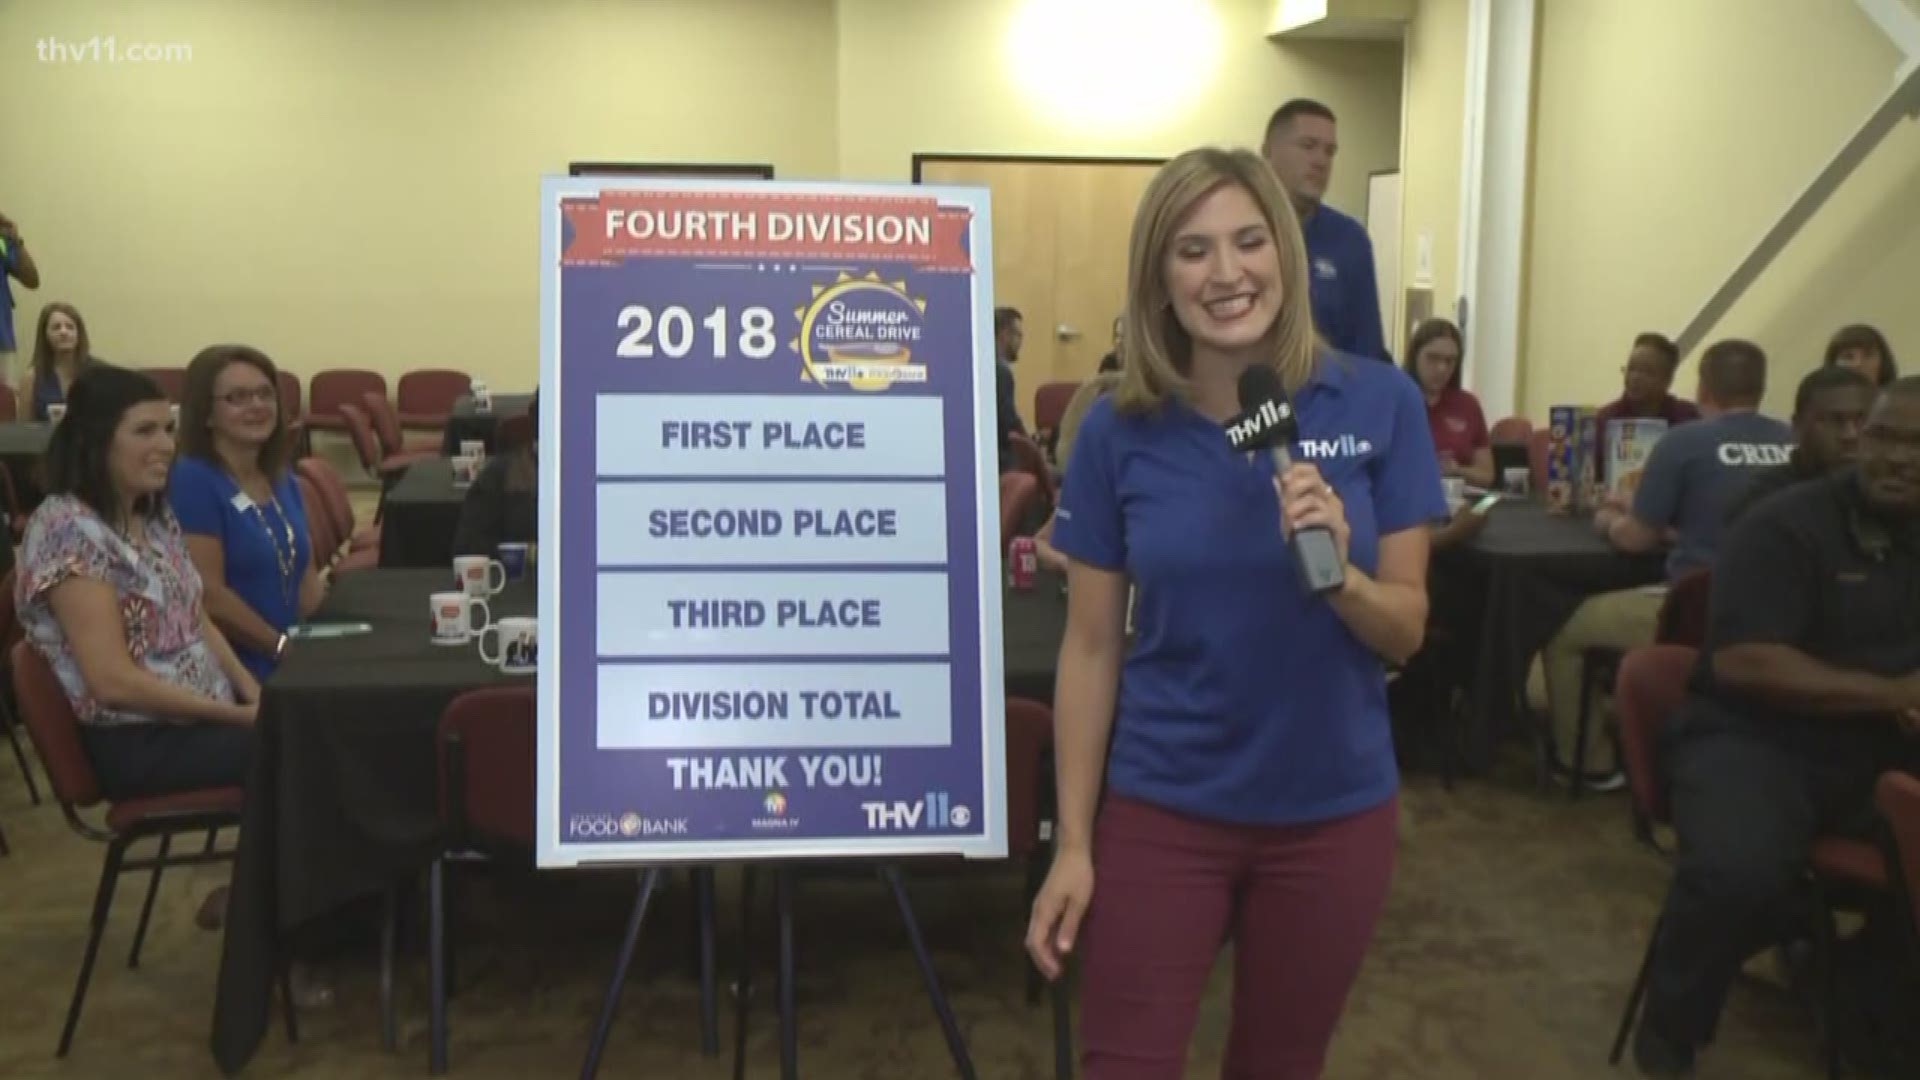 These are the Fourth Division winners for the 2018 THV11 Summer Cereal Drive.